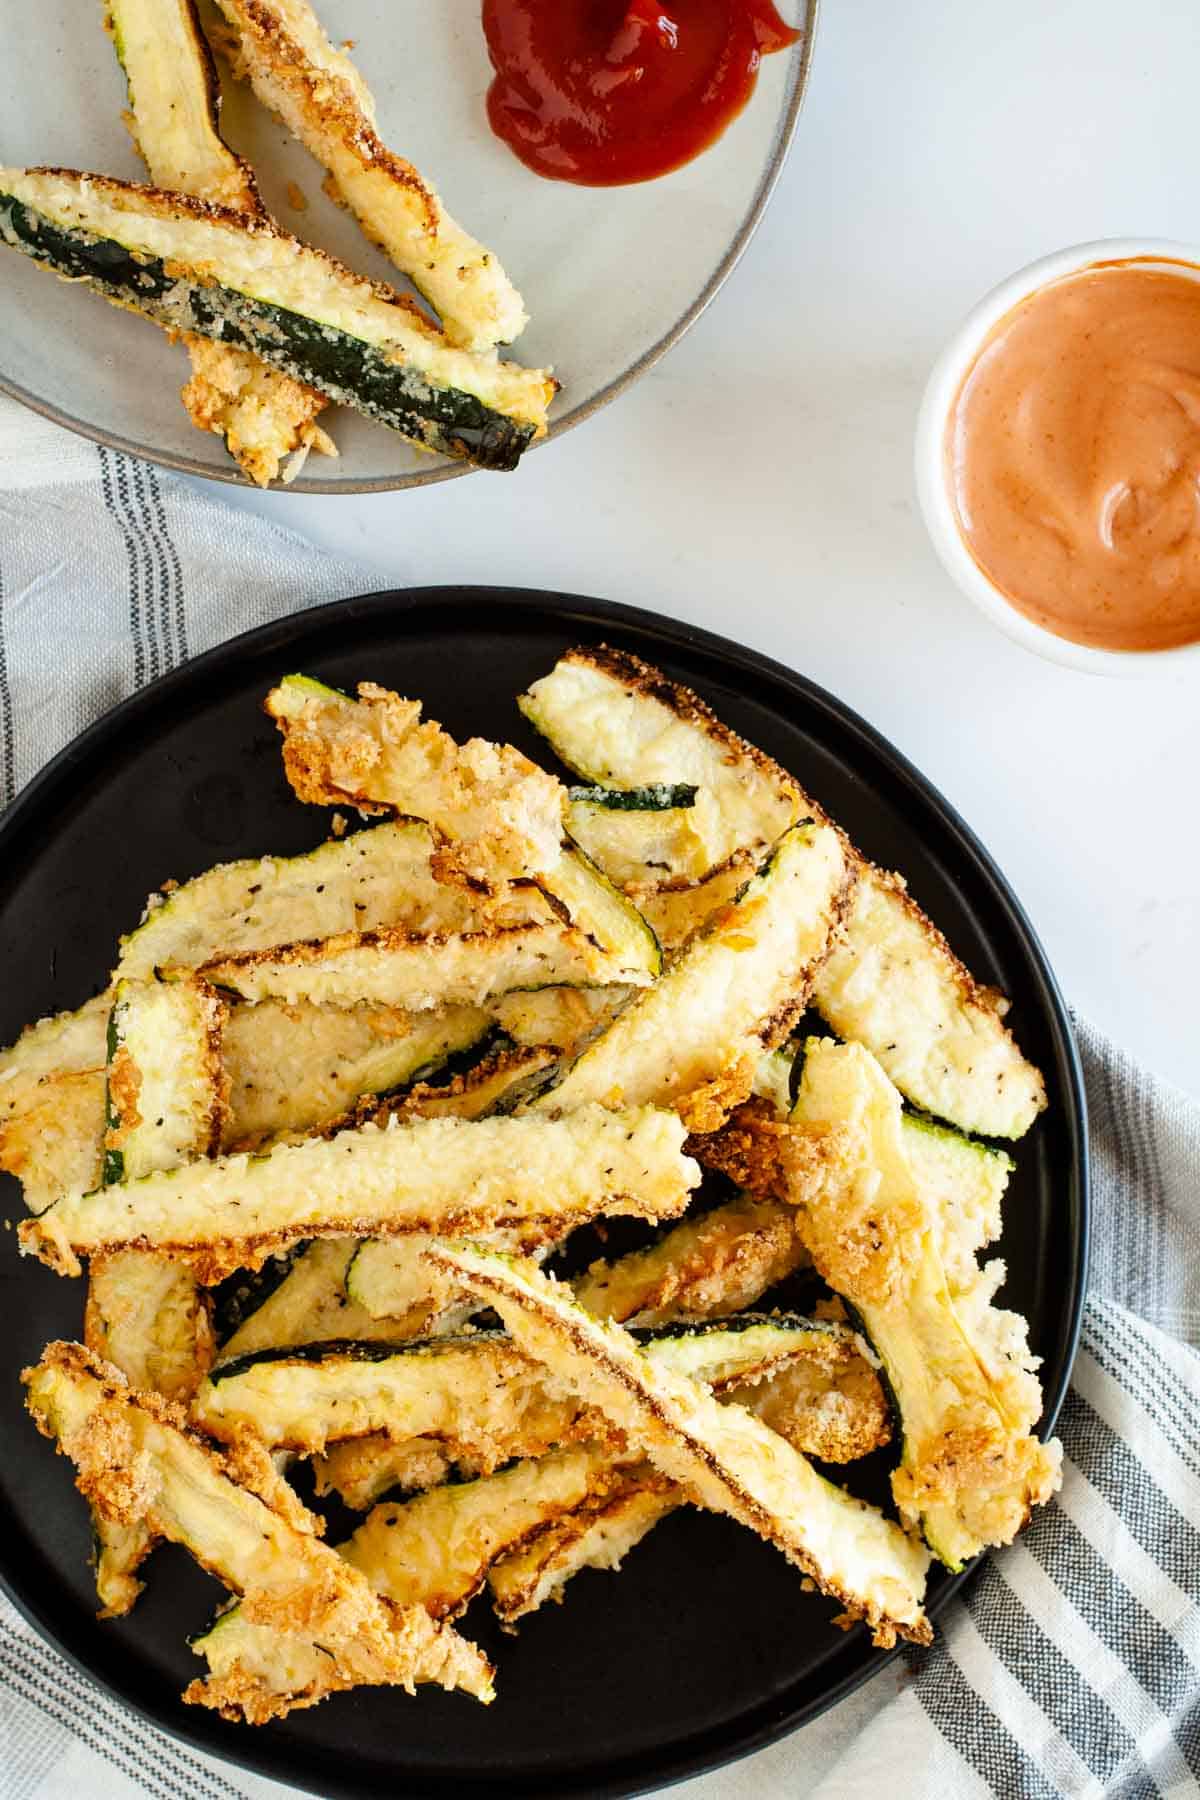 Oven baked zucchini fries served on a black plate with dipping sauce next to them